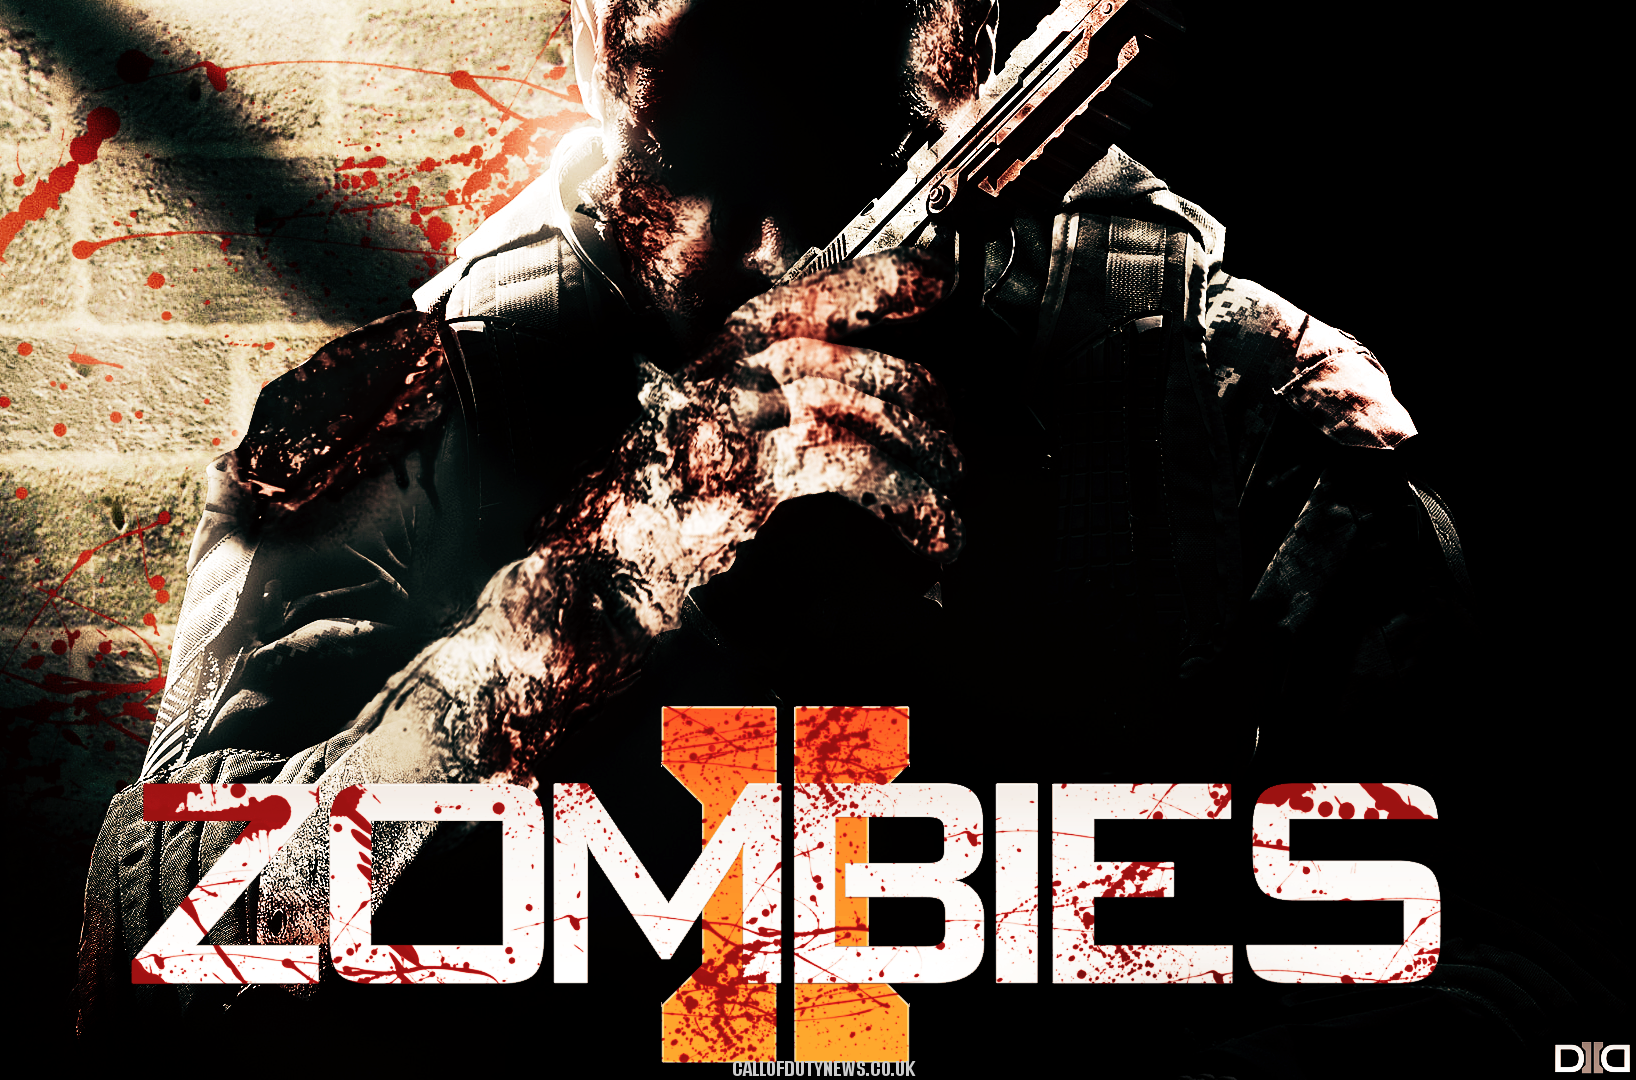 Black Ops 2 Zombies Wallpapers Group (71+)